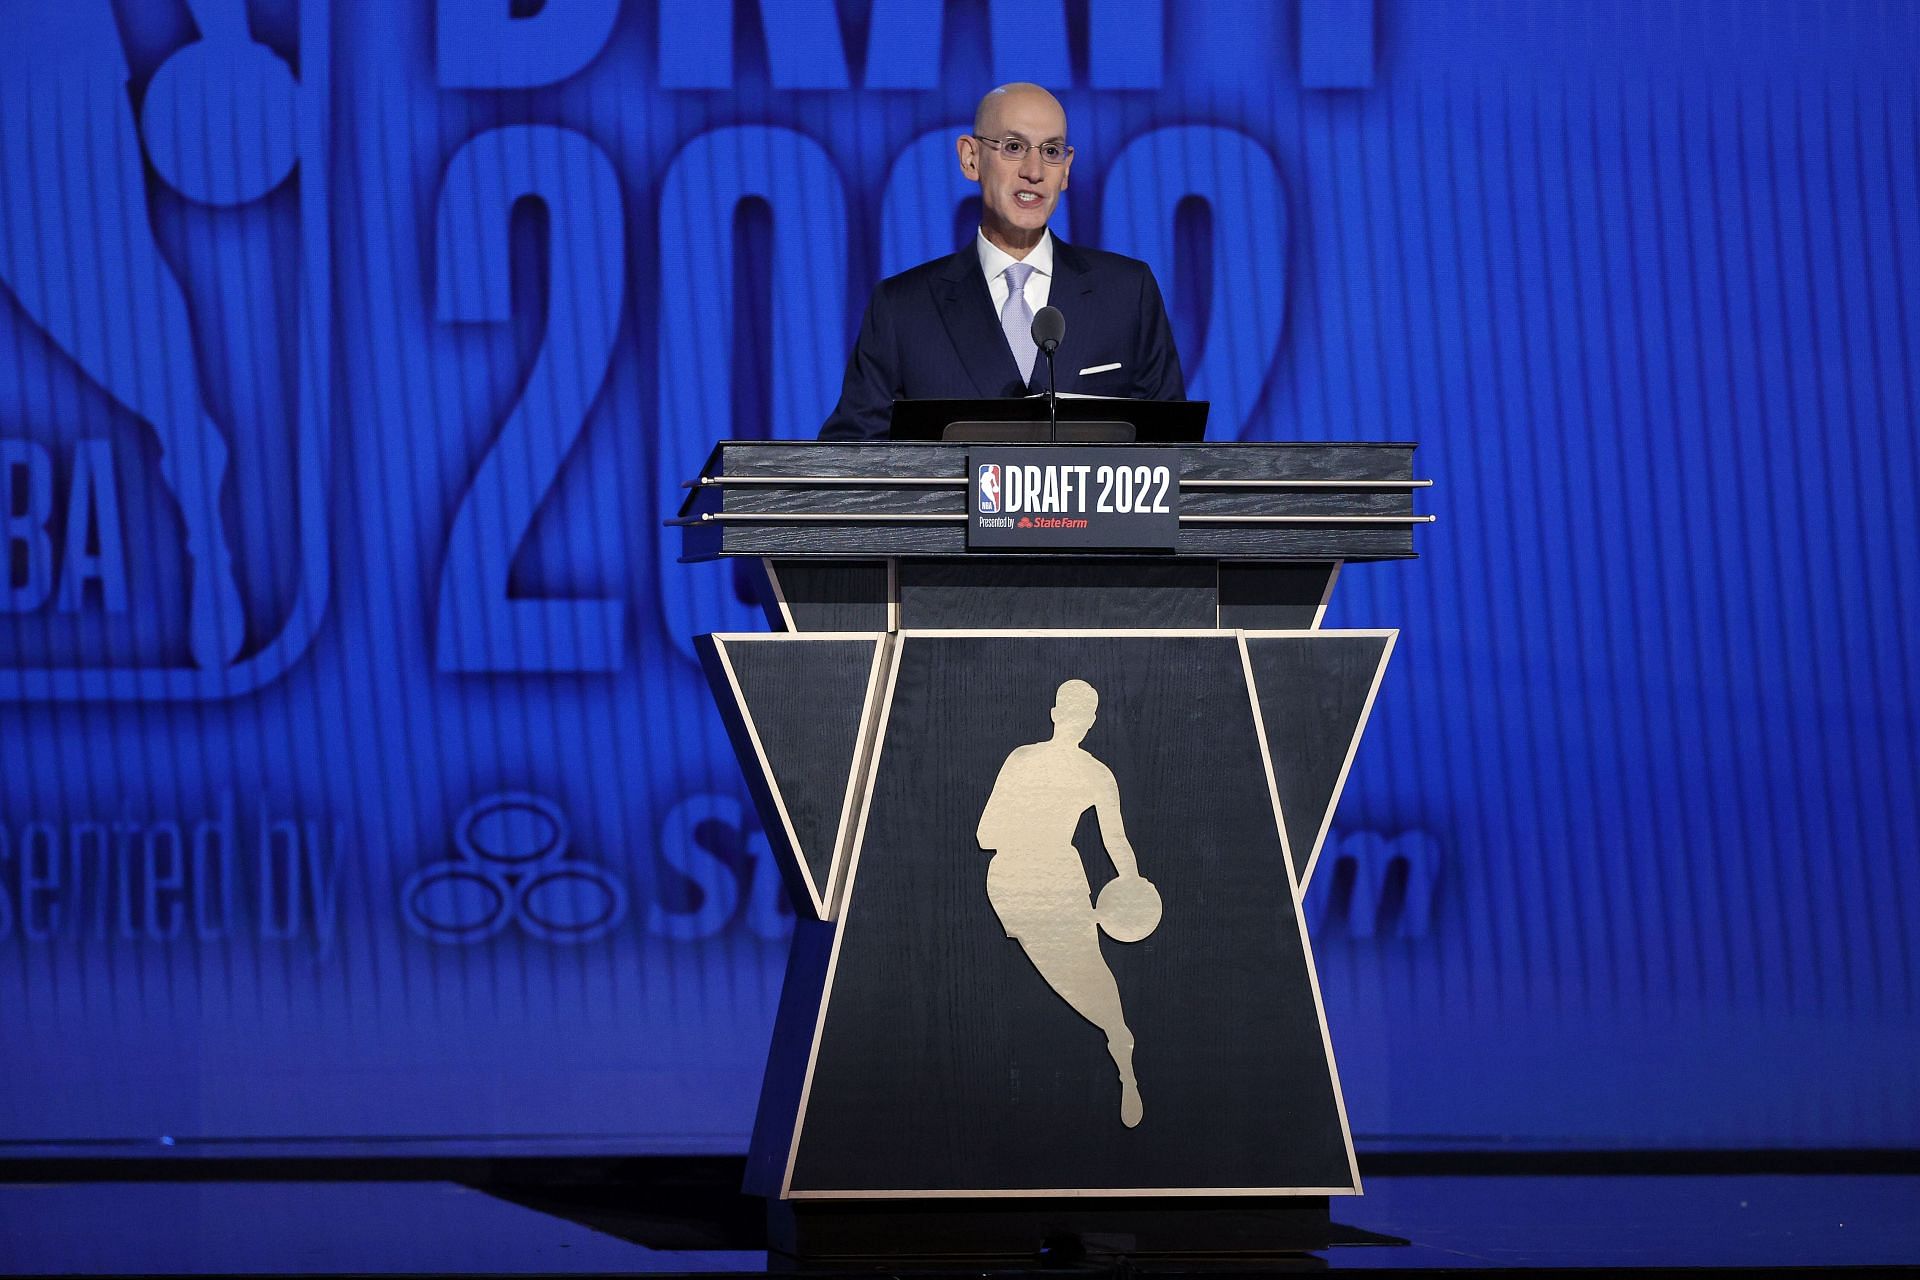 2022 NBA Draft, Commissioner Silver